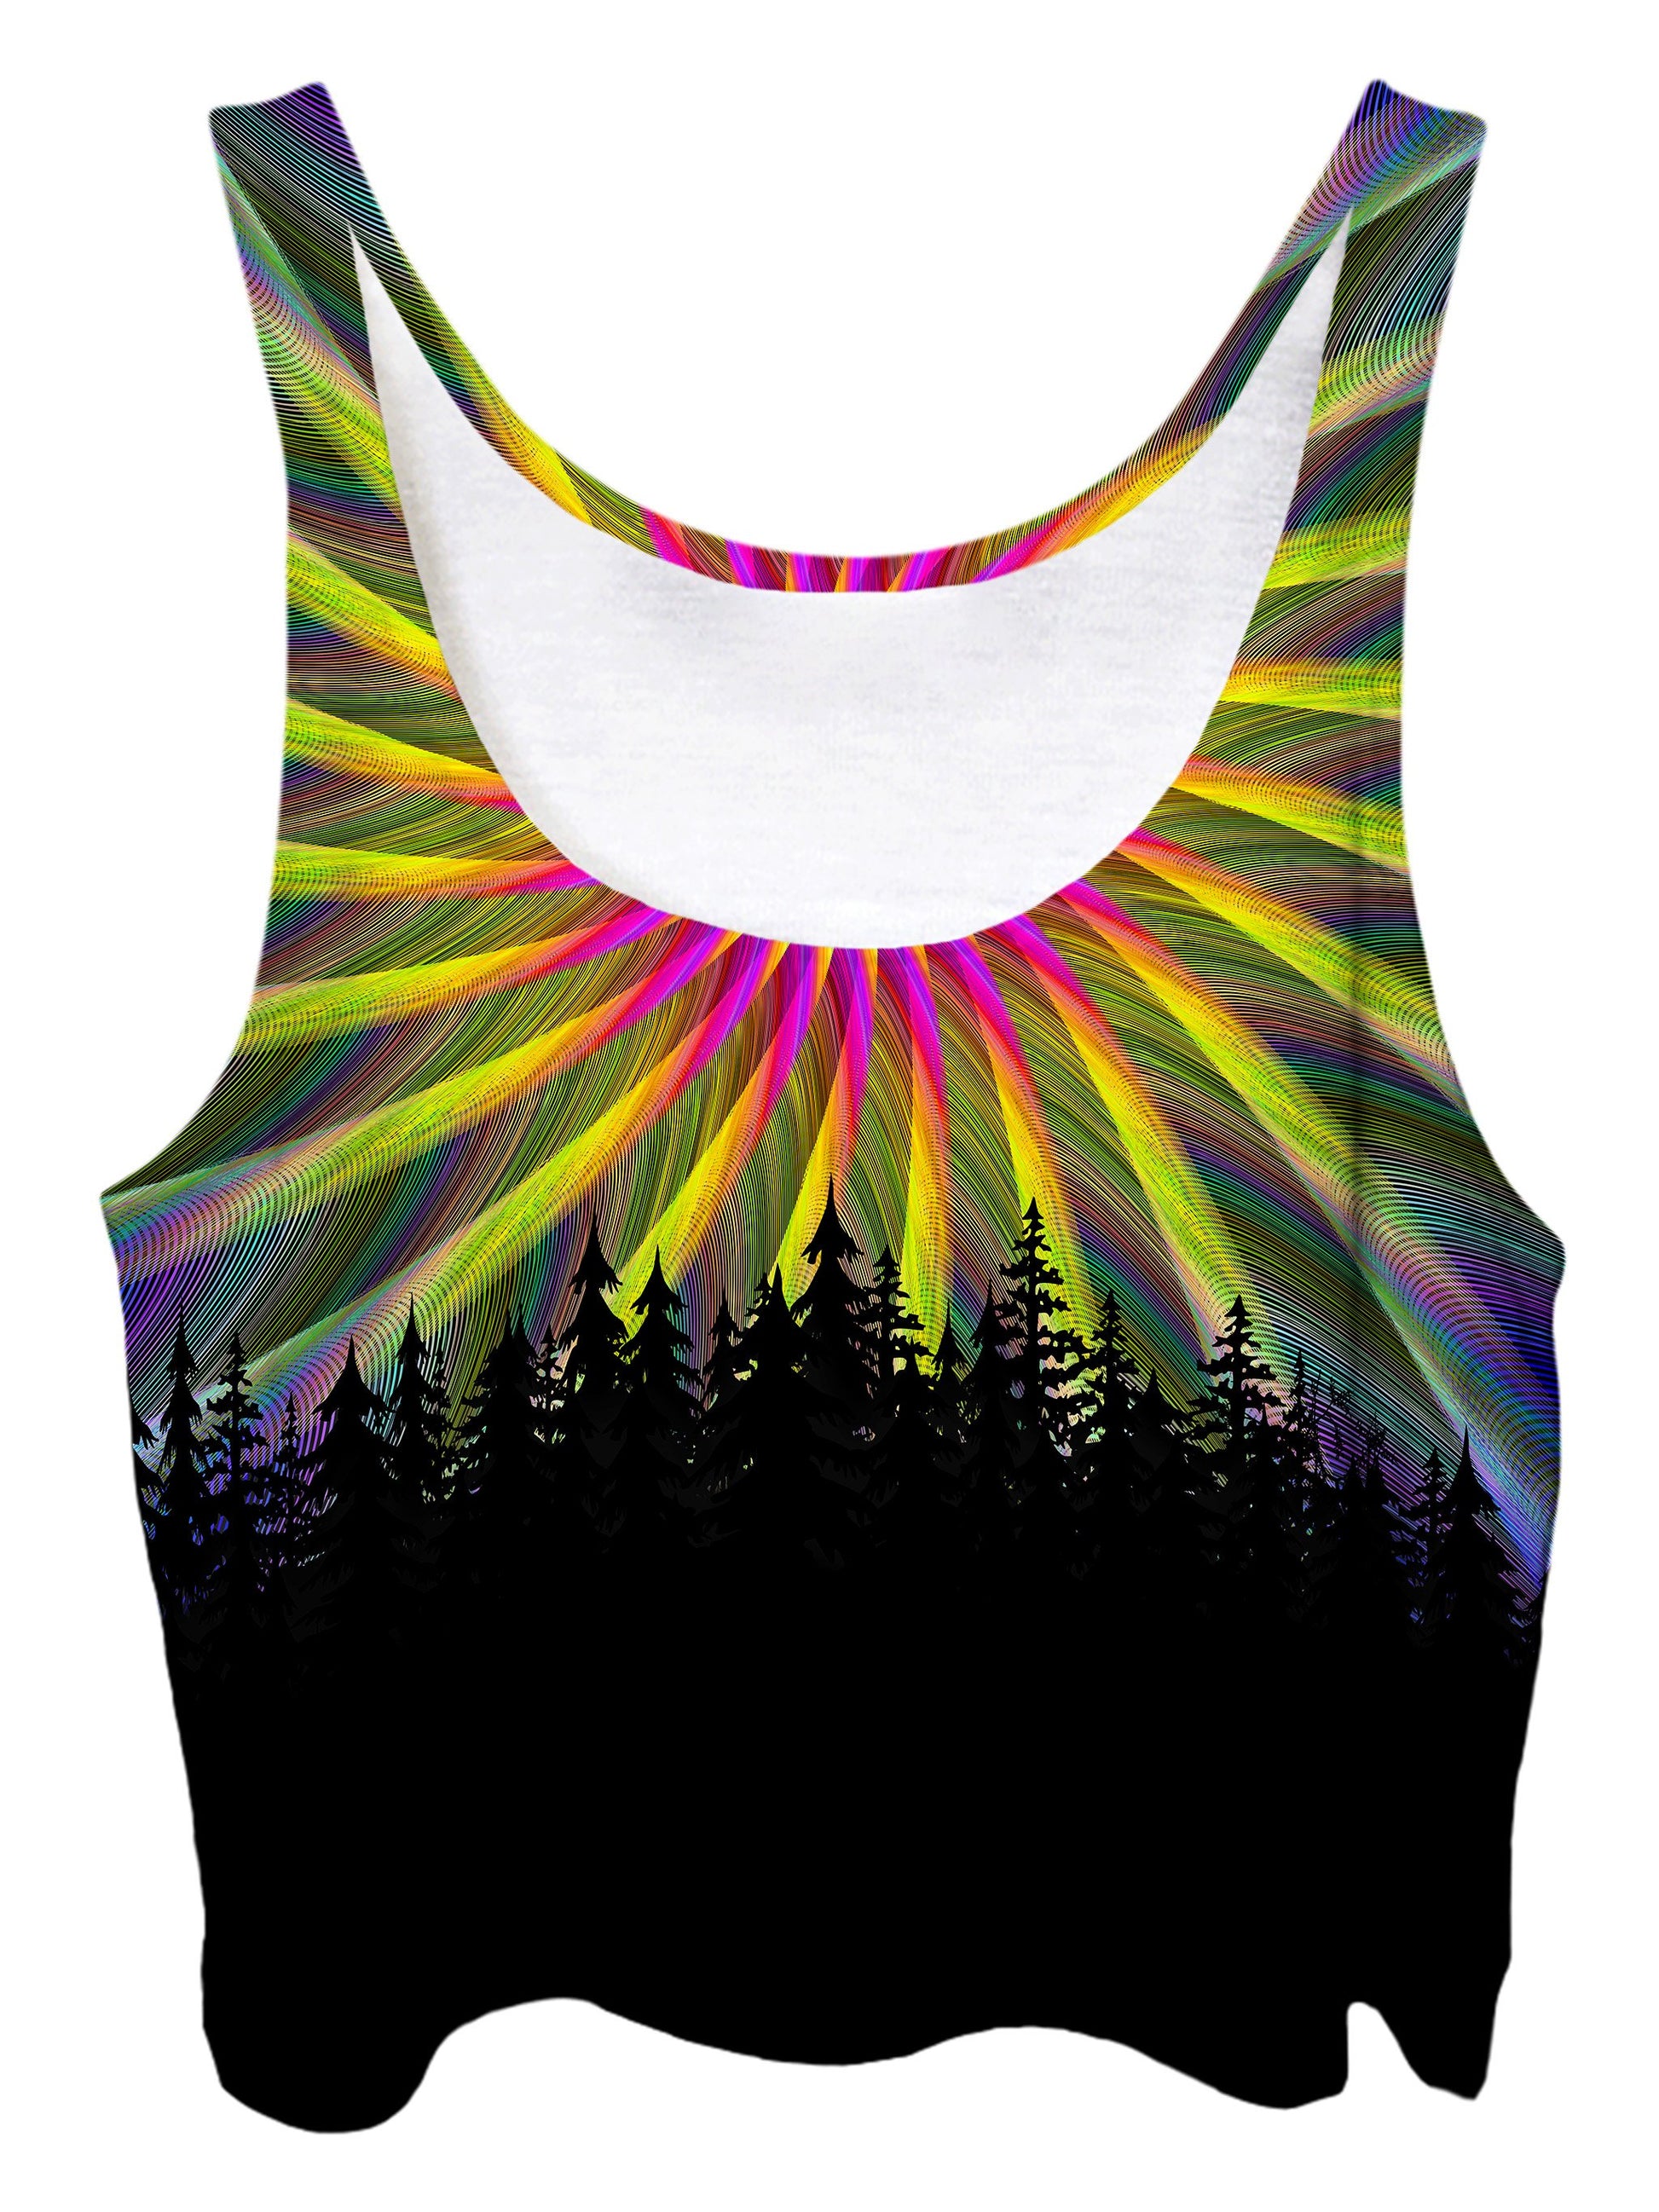 Trippy front view of GratefullyDyed Apparel light fractal mandala forest crop top.